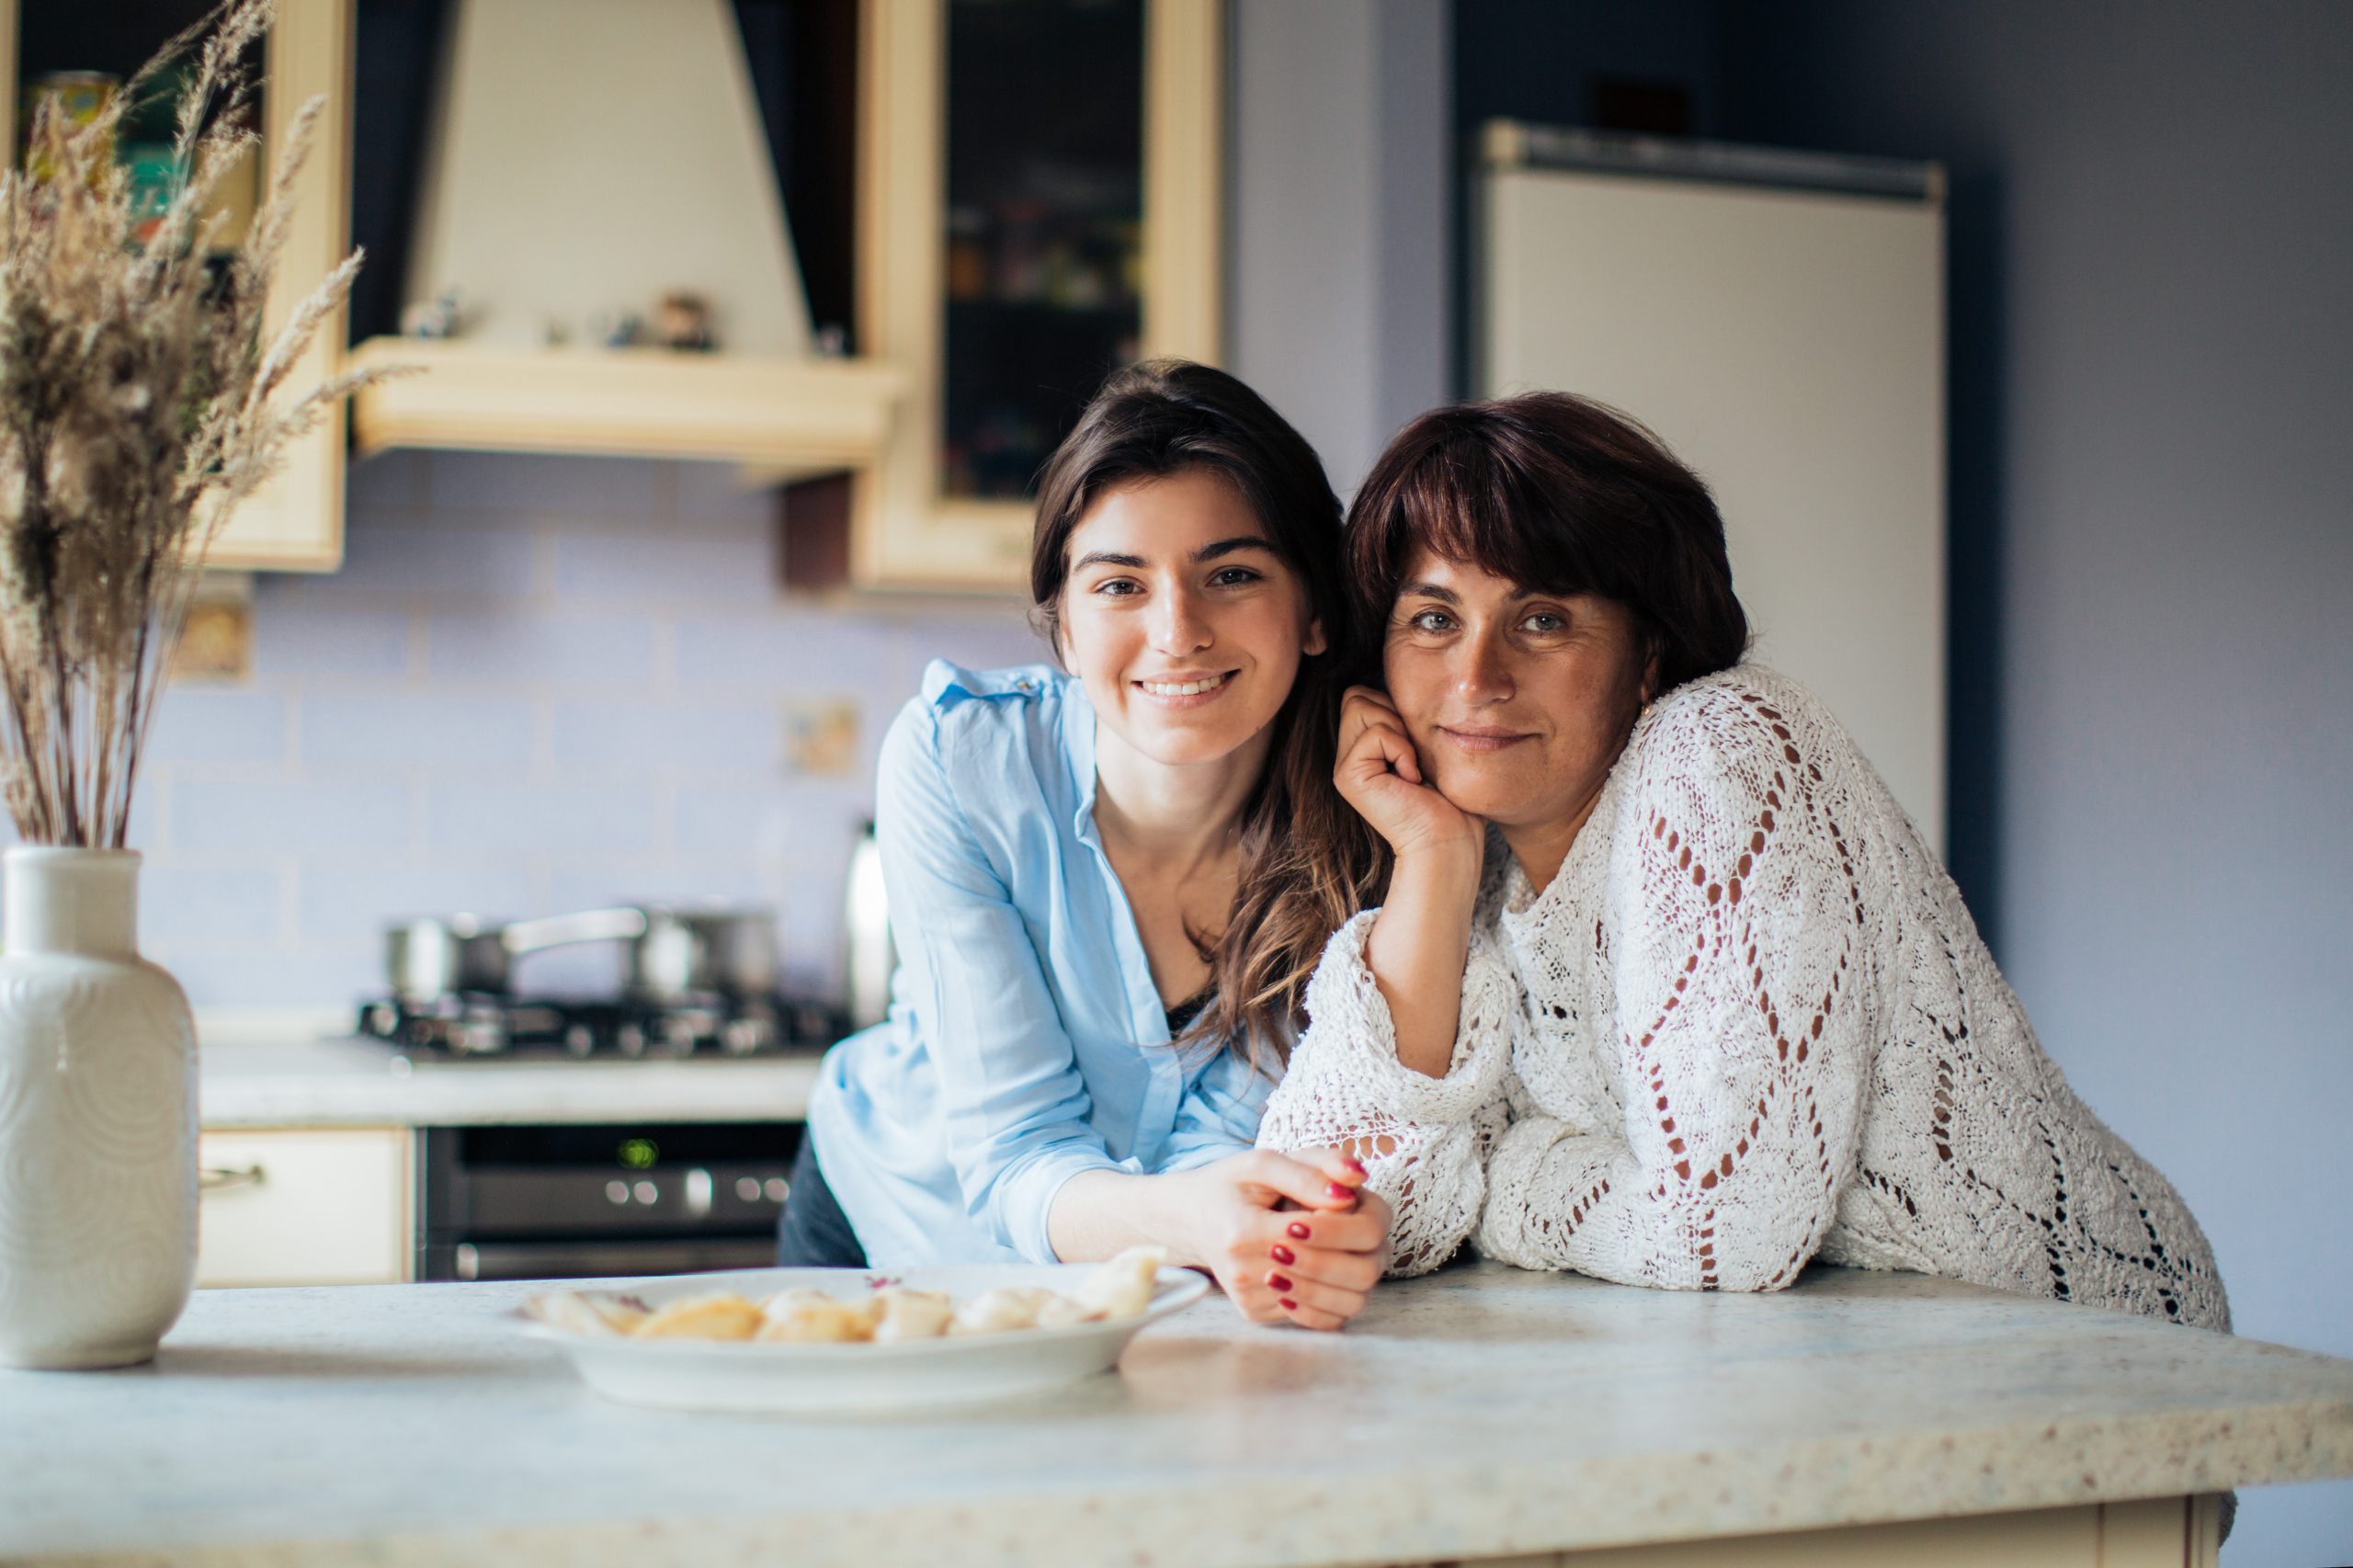 A middle-aged woman and a young woman both lean on a countertop in a home kitchen